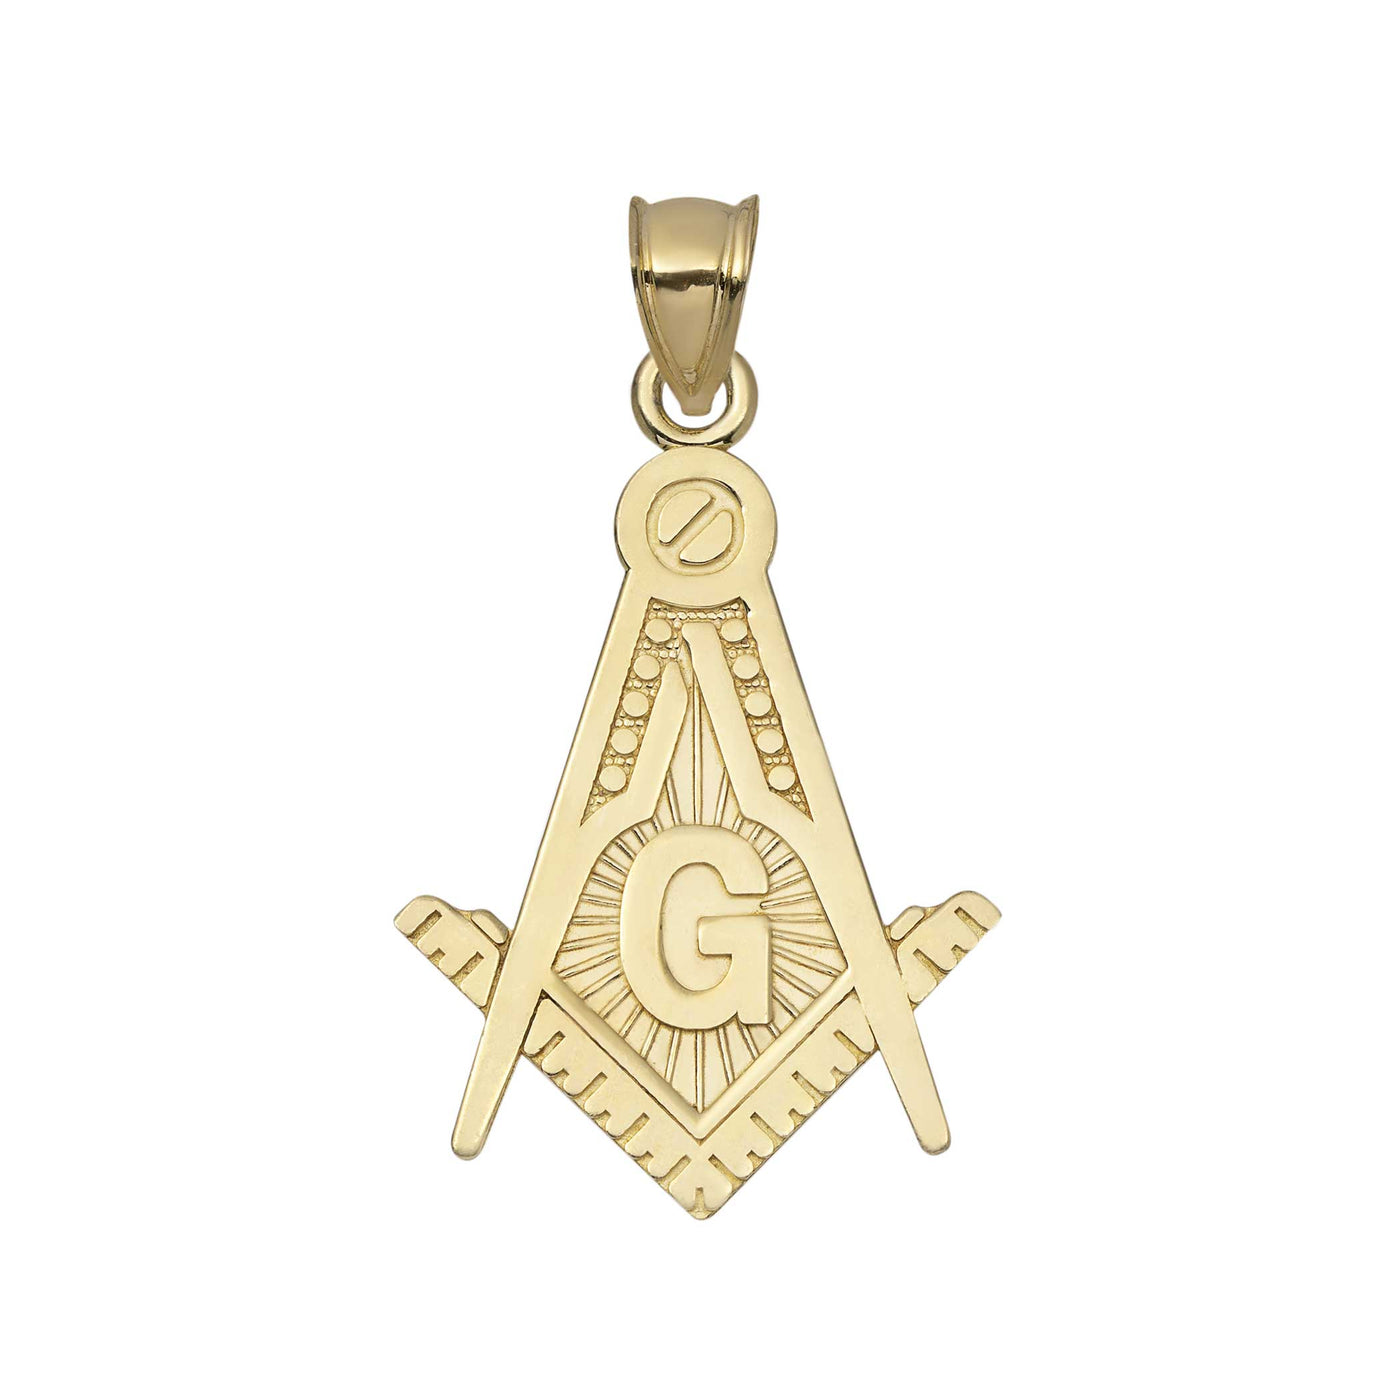 The Square and Compasses Masonic Pendant 10K Yellow Gold